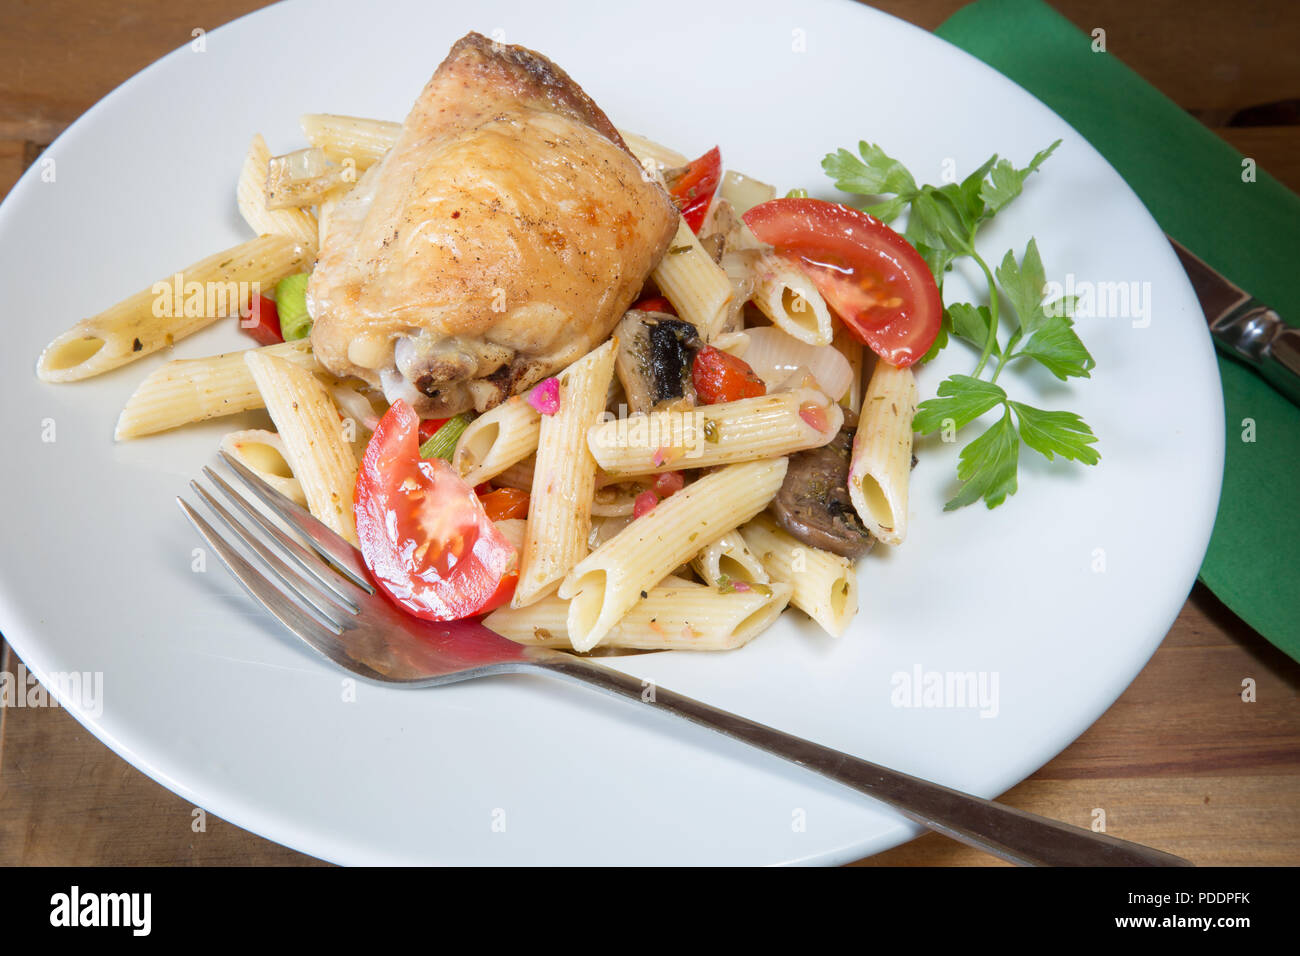 A plated meal of Pollo e Penne, Garlic infused roast Chicken thigh with Penne pasta and tomato, onion and mushroom Stock Photo